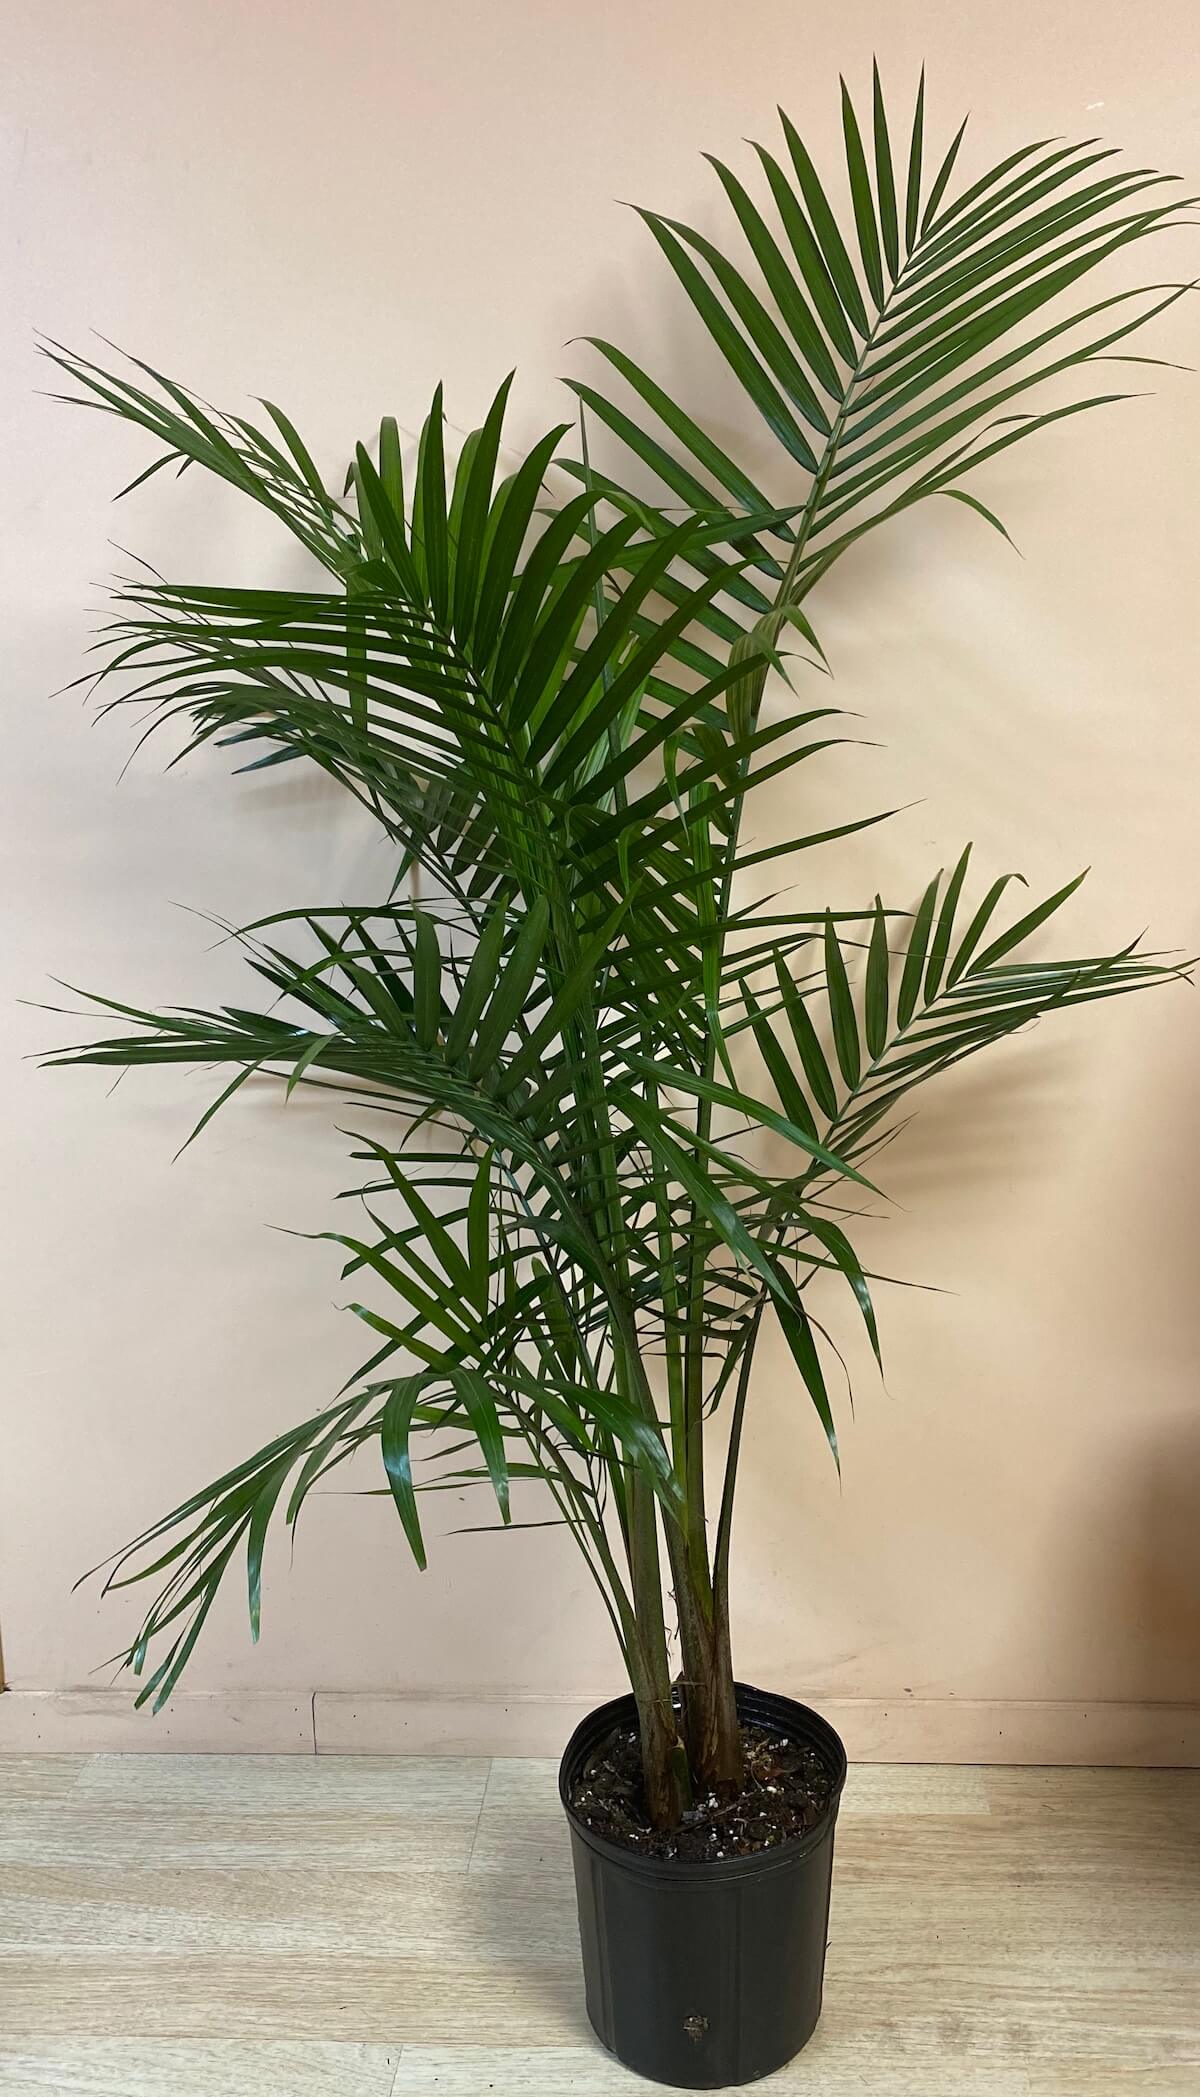 Costa Farms Plants With Benefits Live Indoor 3 4 Tall Green Majesty Palm Tree Bright Indirect